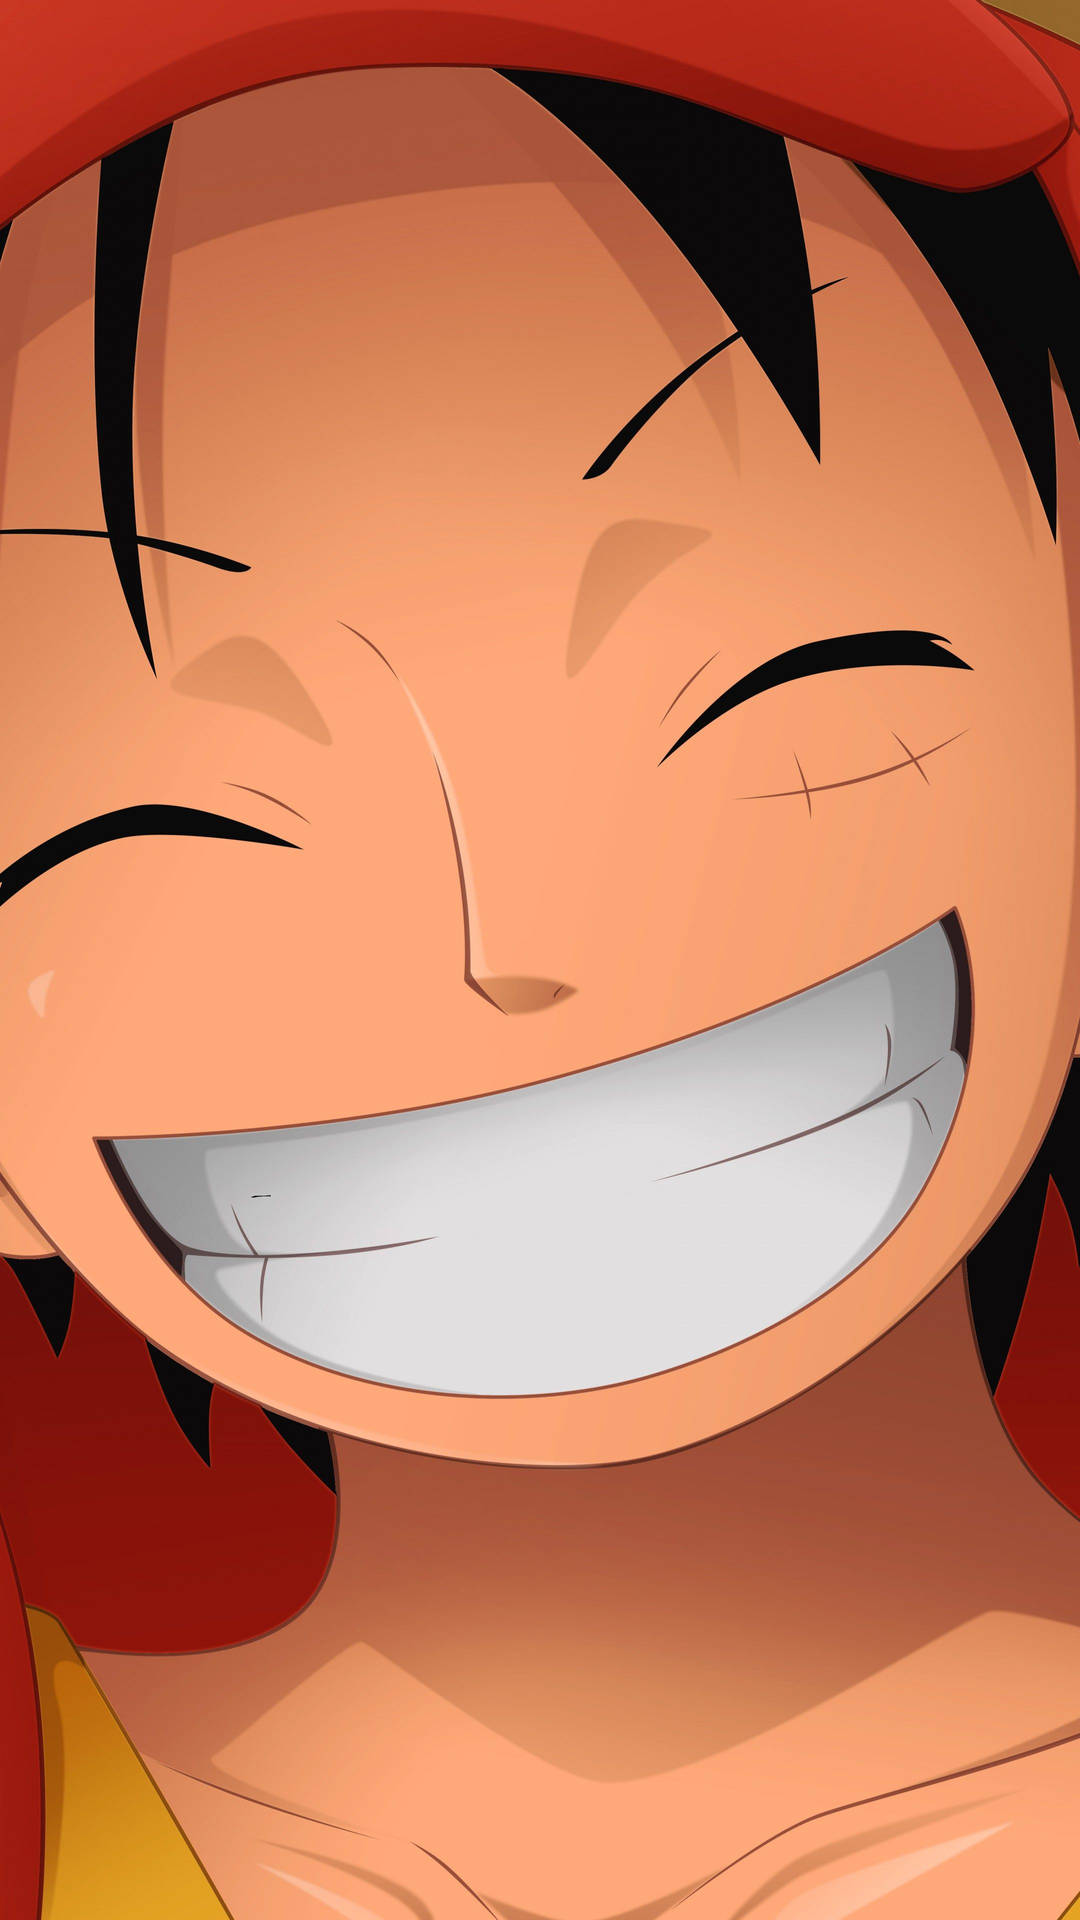 Top 999+ Luffy Smile Wallpaper Full HD, 4K✅Free to Use